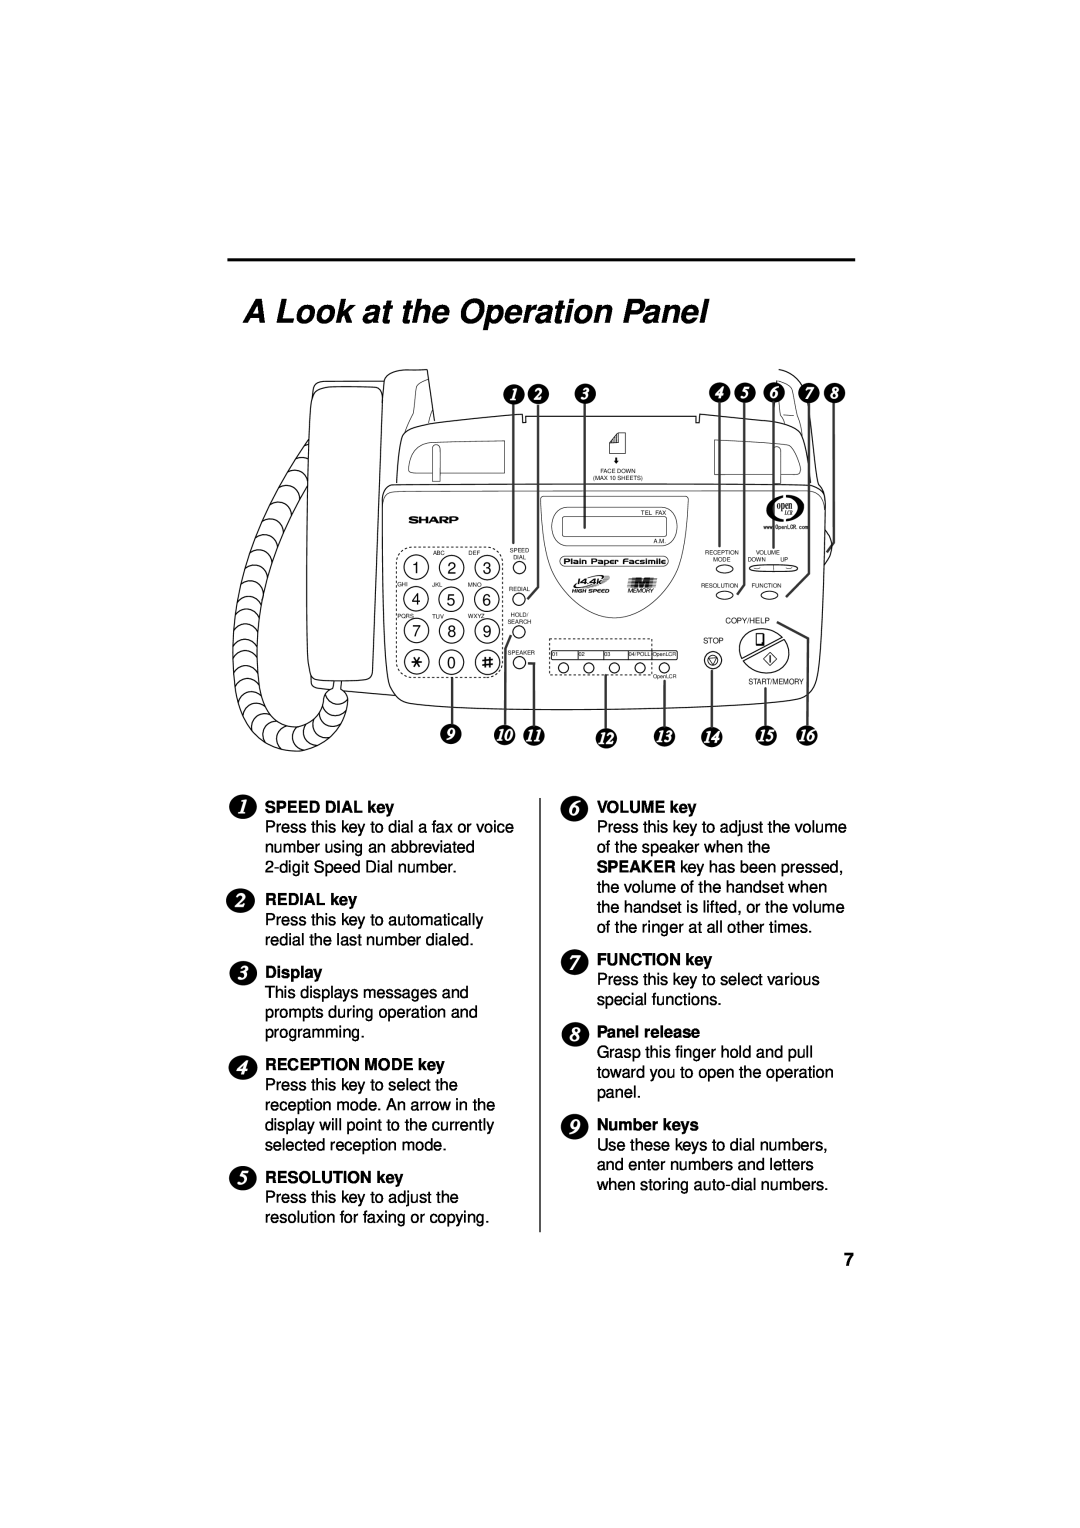 Sharp UX-340LM A Look at the Operation Panel, SPEED DIAL key, REDIAL key, Display, RESOLUTION key, VOLUME key, Number keys 